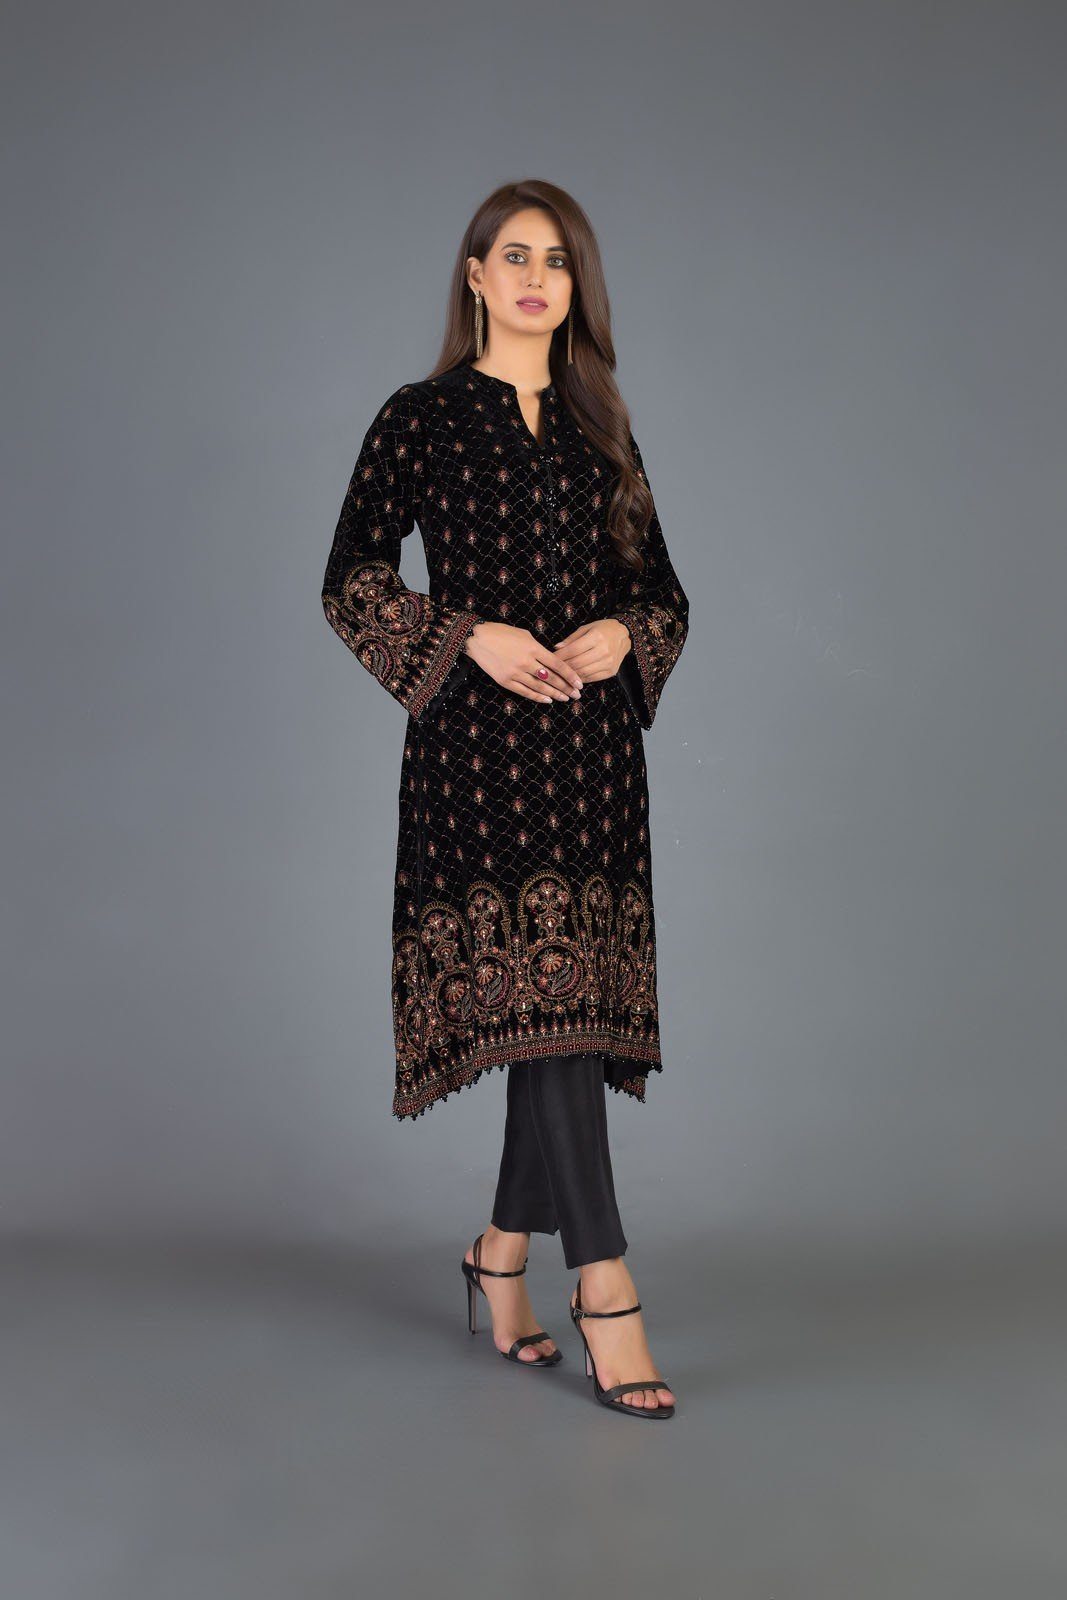 Heavy Embroidered Velvet Dress with Jamawar Trouser Price in Pakistan  M011538  2023 Designs Reviews  Videos